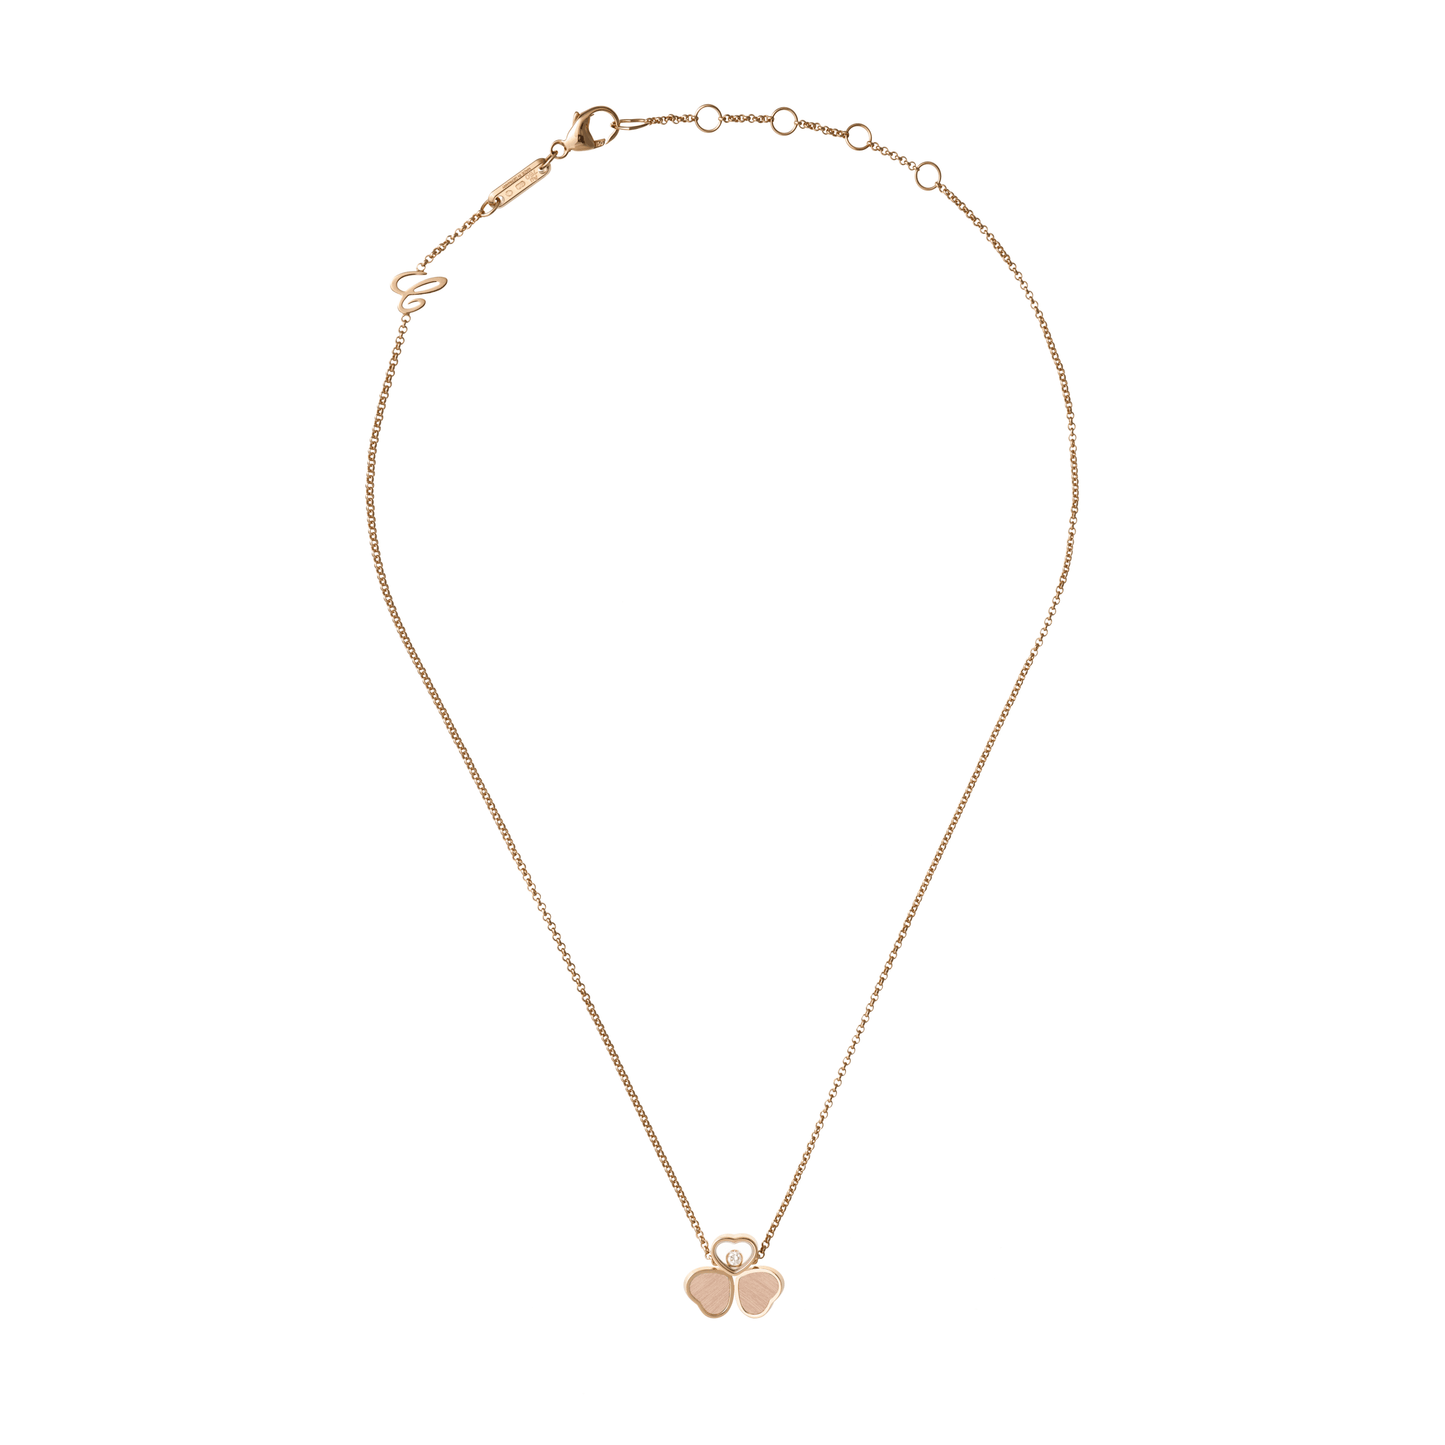 HAPPY HEARTS WINGS NECKLACE, ETHICAL ROSE GOLD, DIAMOND 81A083-5711